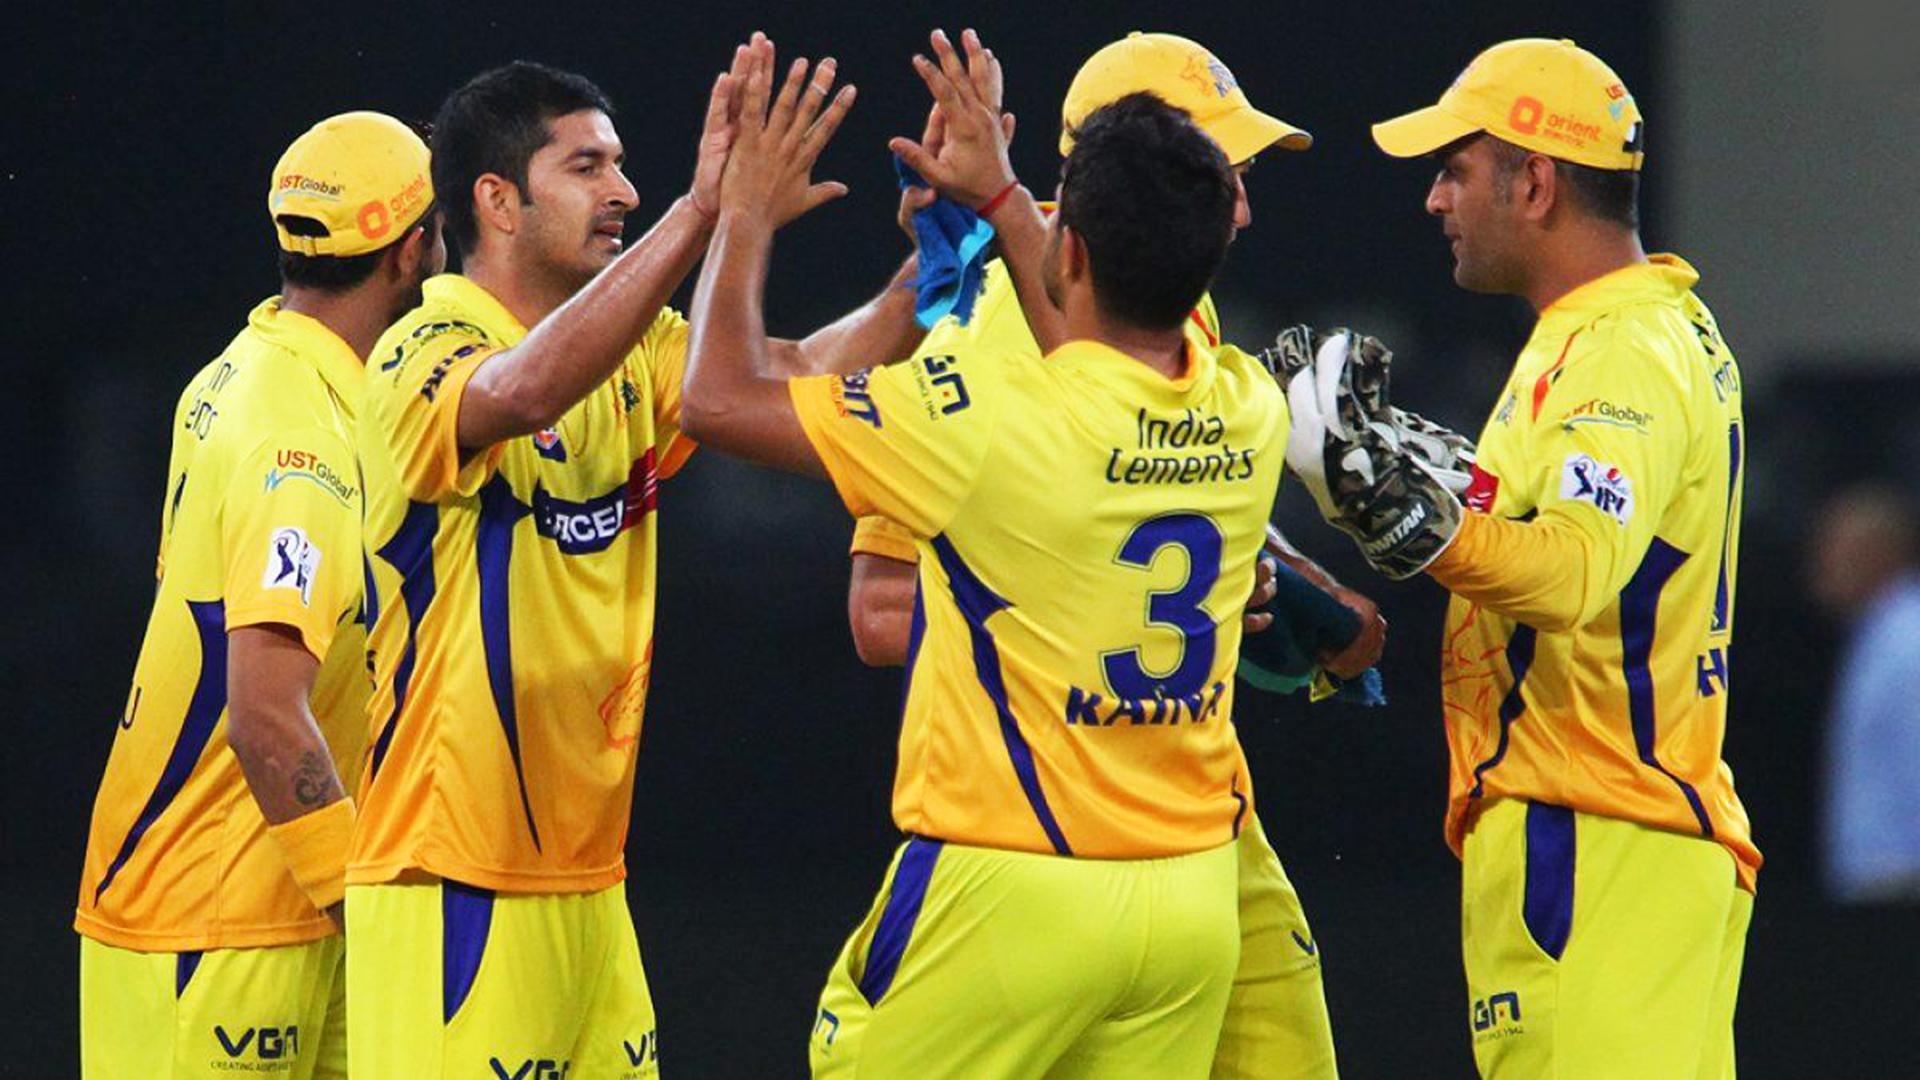 Csk Wallpapers Hd 2014 - Csk Images Download 2019 , HD Wallpaper & Backgrounds